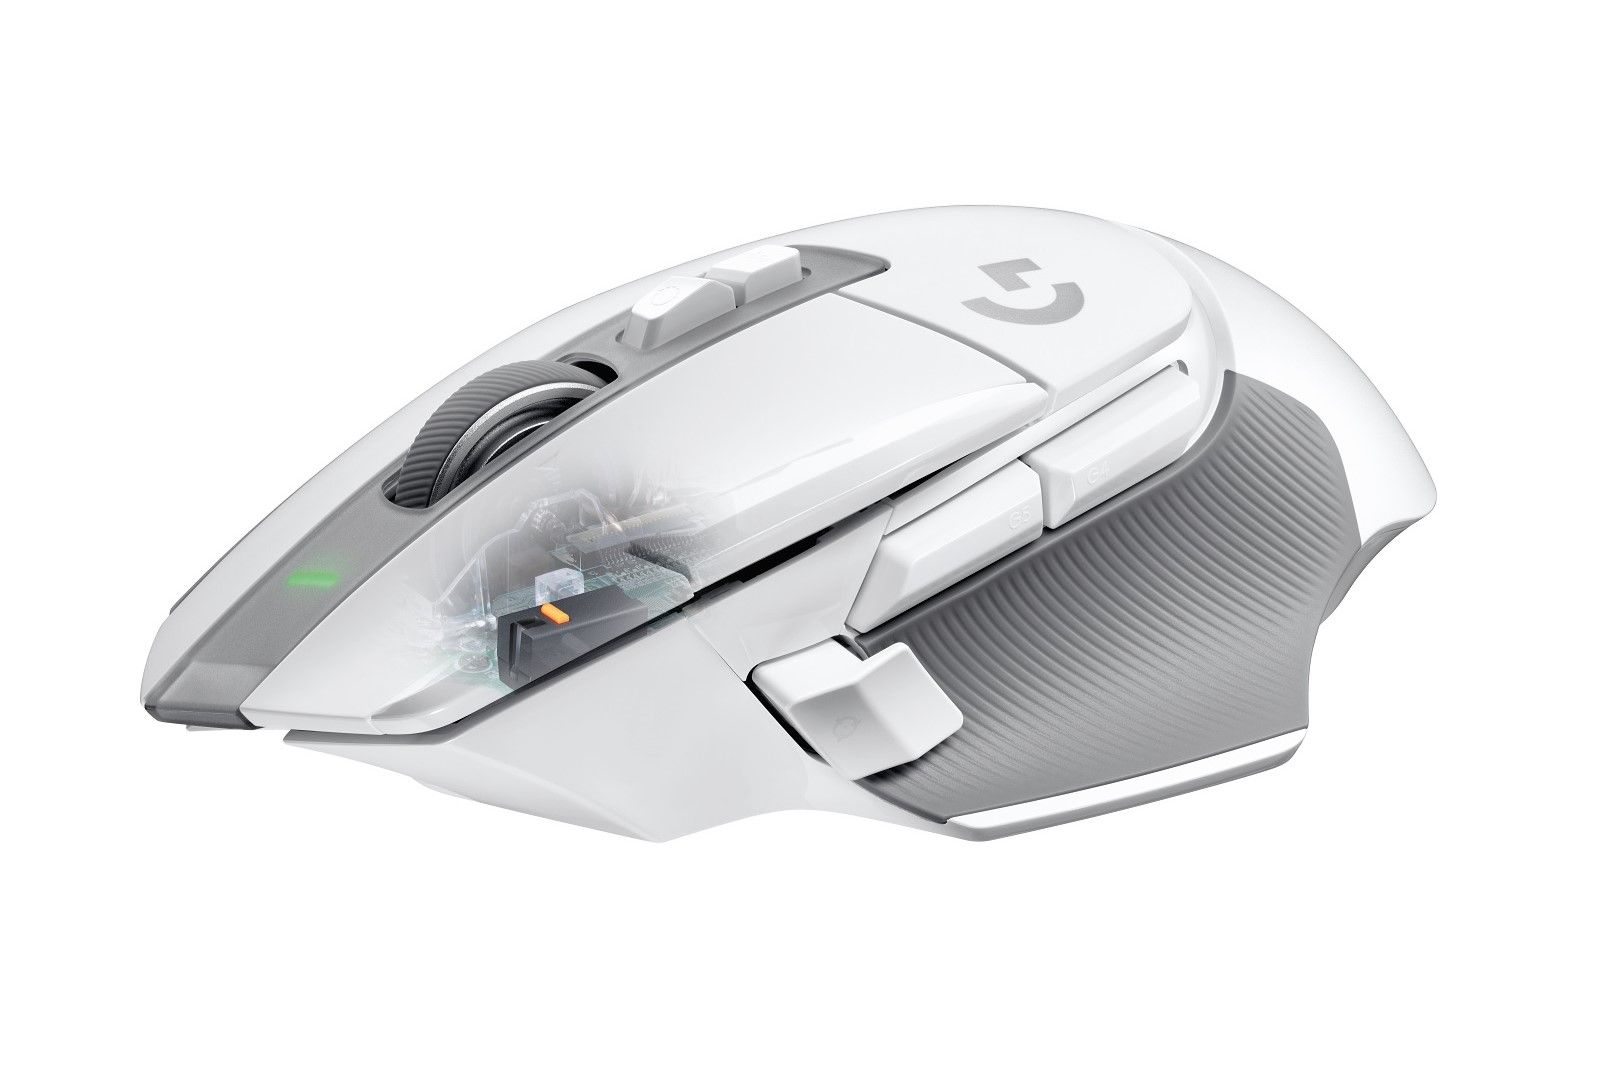 Logitech is finally updating the legendary G502 gaming mouse with three models photo 2